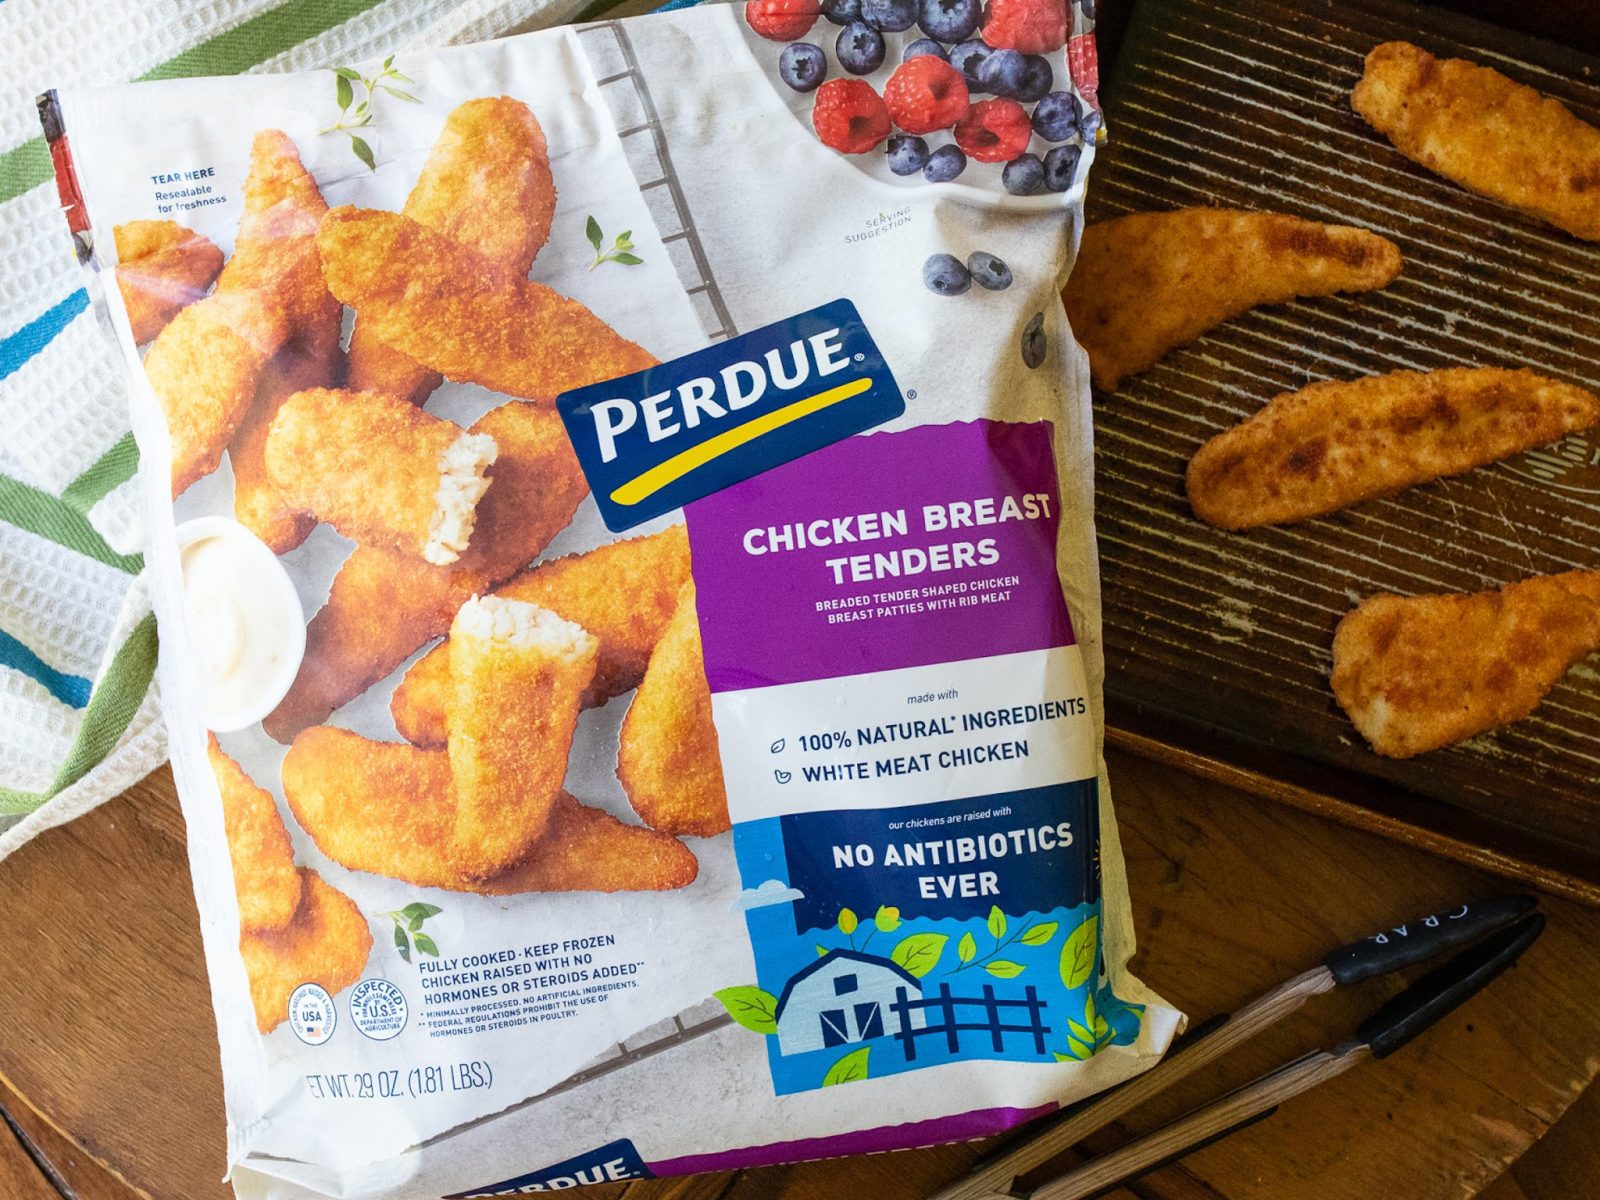 Nice Deal On Perdue Frozen Chicken – Get The Bags For Just $4.99 At Kroger